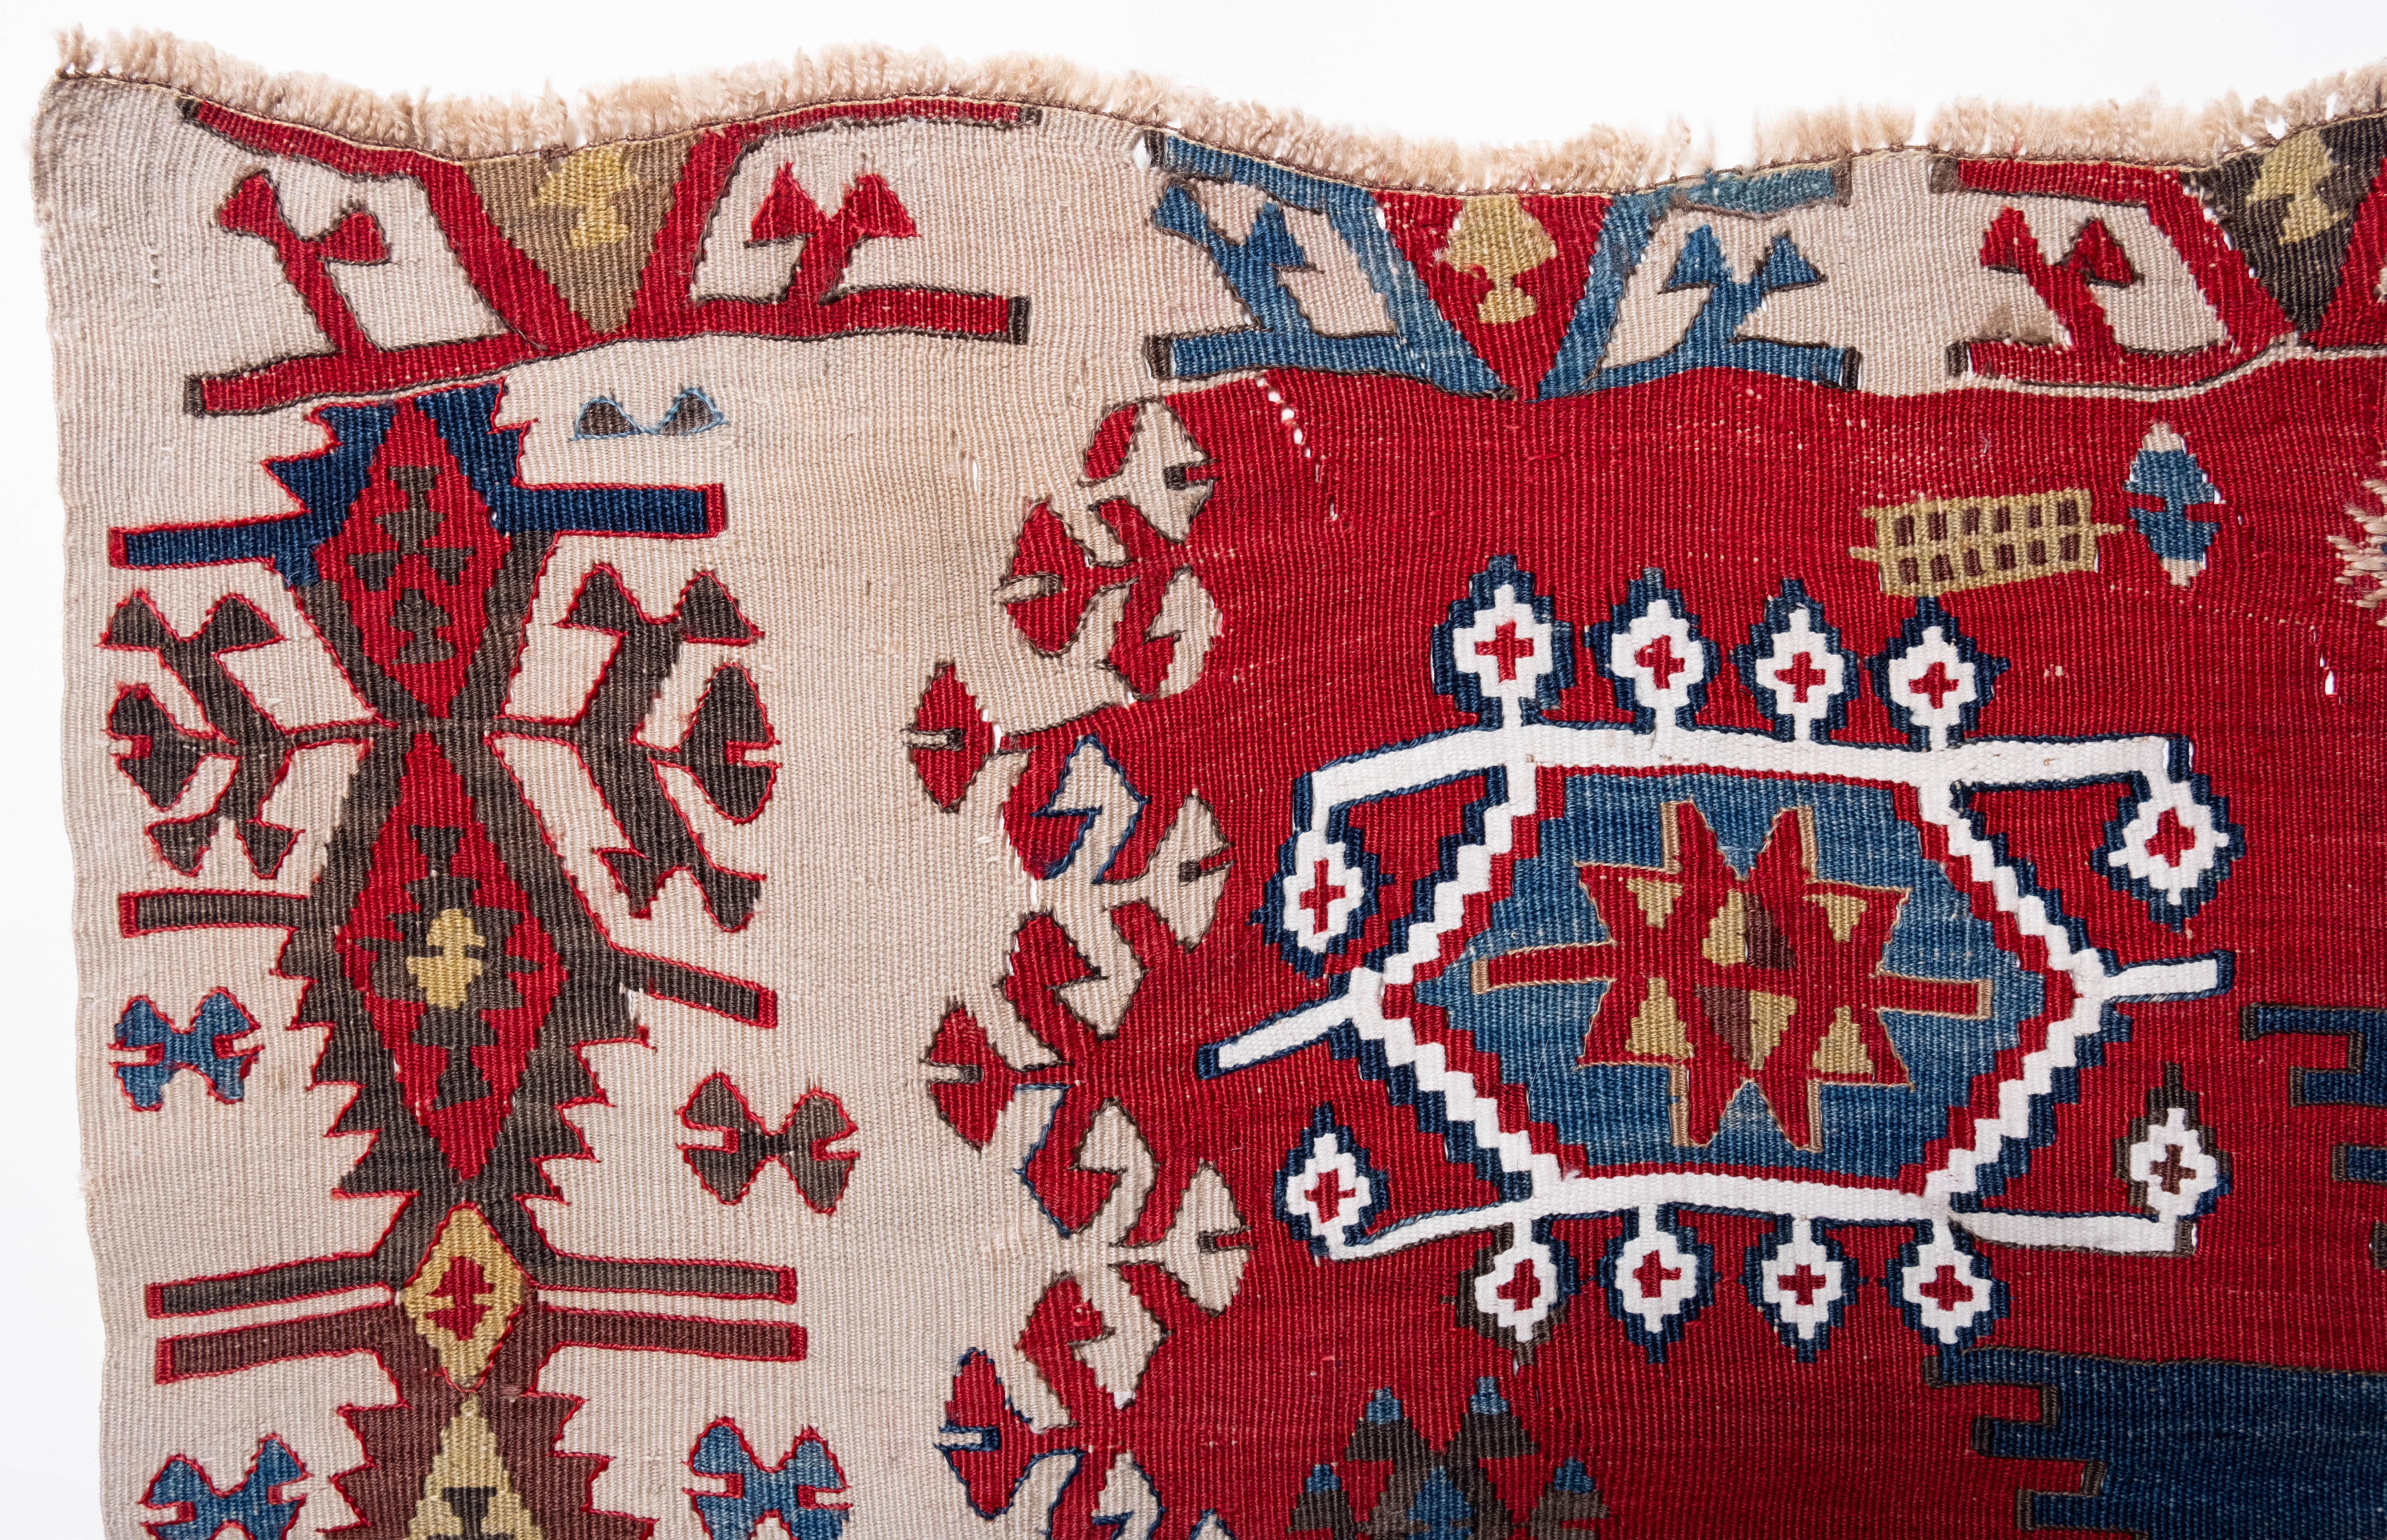 This is Eastern Anatolian Antique Kilim from the Rashwan, Malatya region with a rare and beautiful color composition.

The difference in dyeing on the left and right sides is proof that it was handmade by one person who took a lot of time to weave